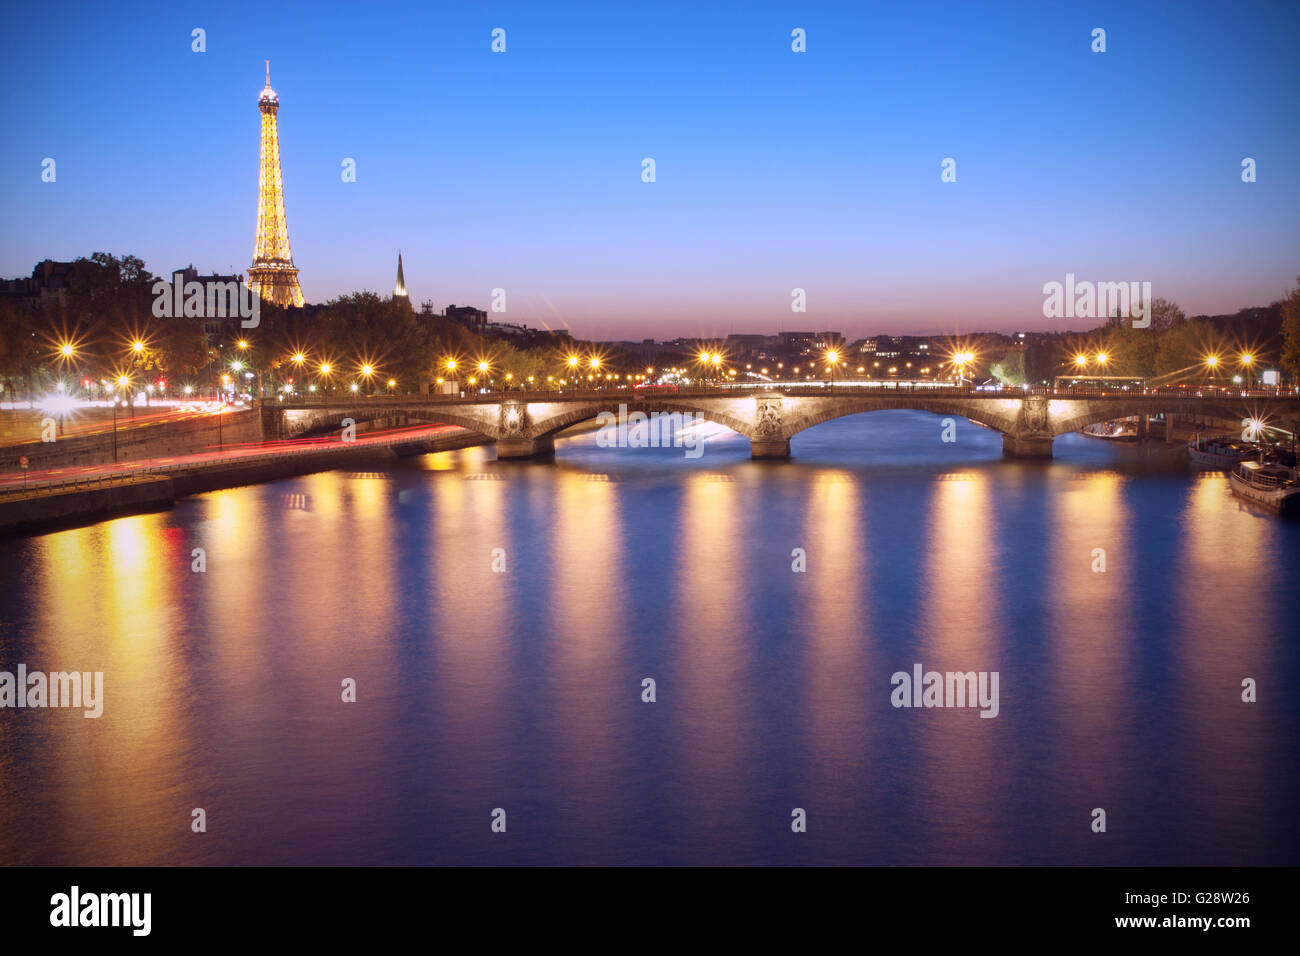 Paris, France - October 23 2011: Seine River and Eiffel Tower at dusk. The Eiffel tower is the most visited monument of France. Stock Photo